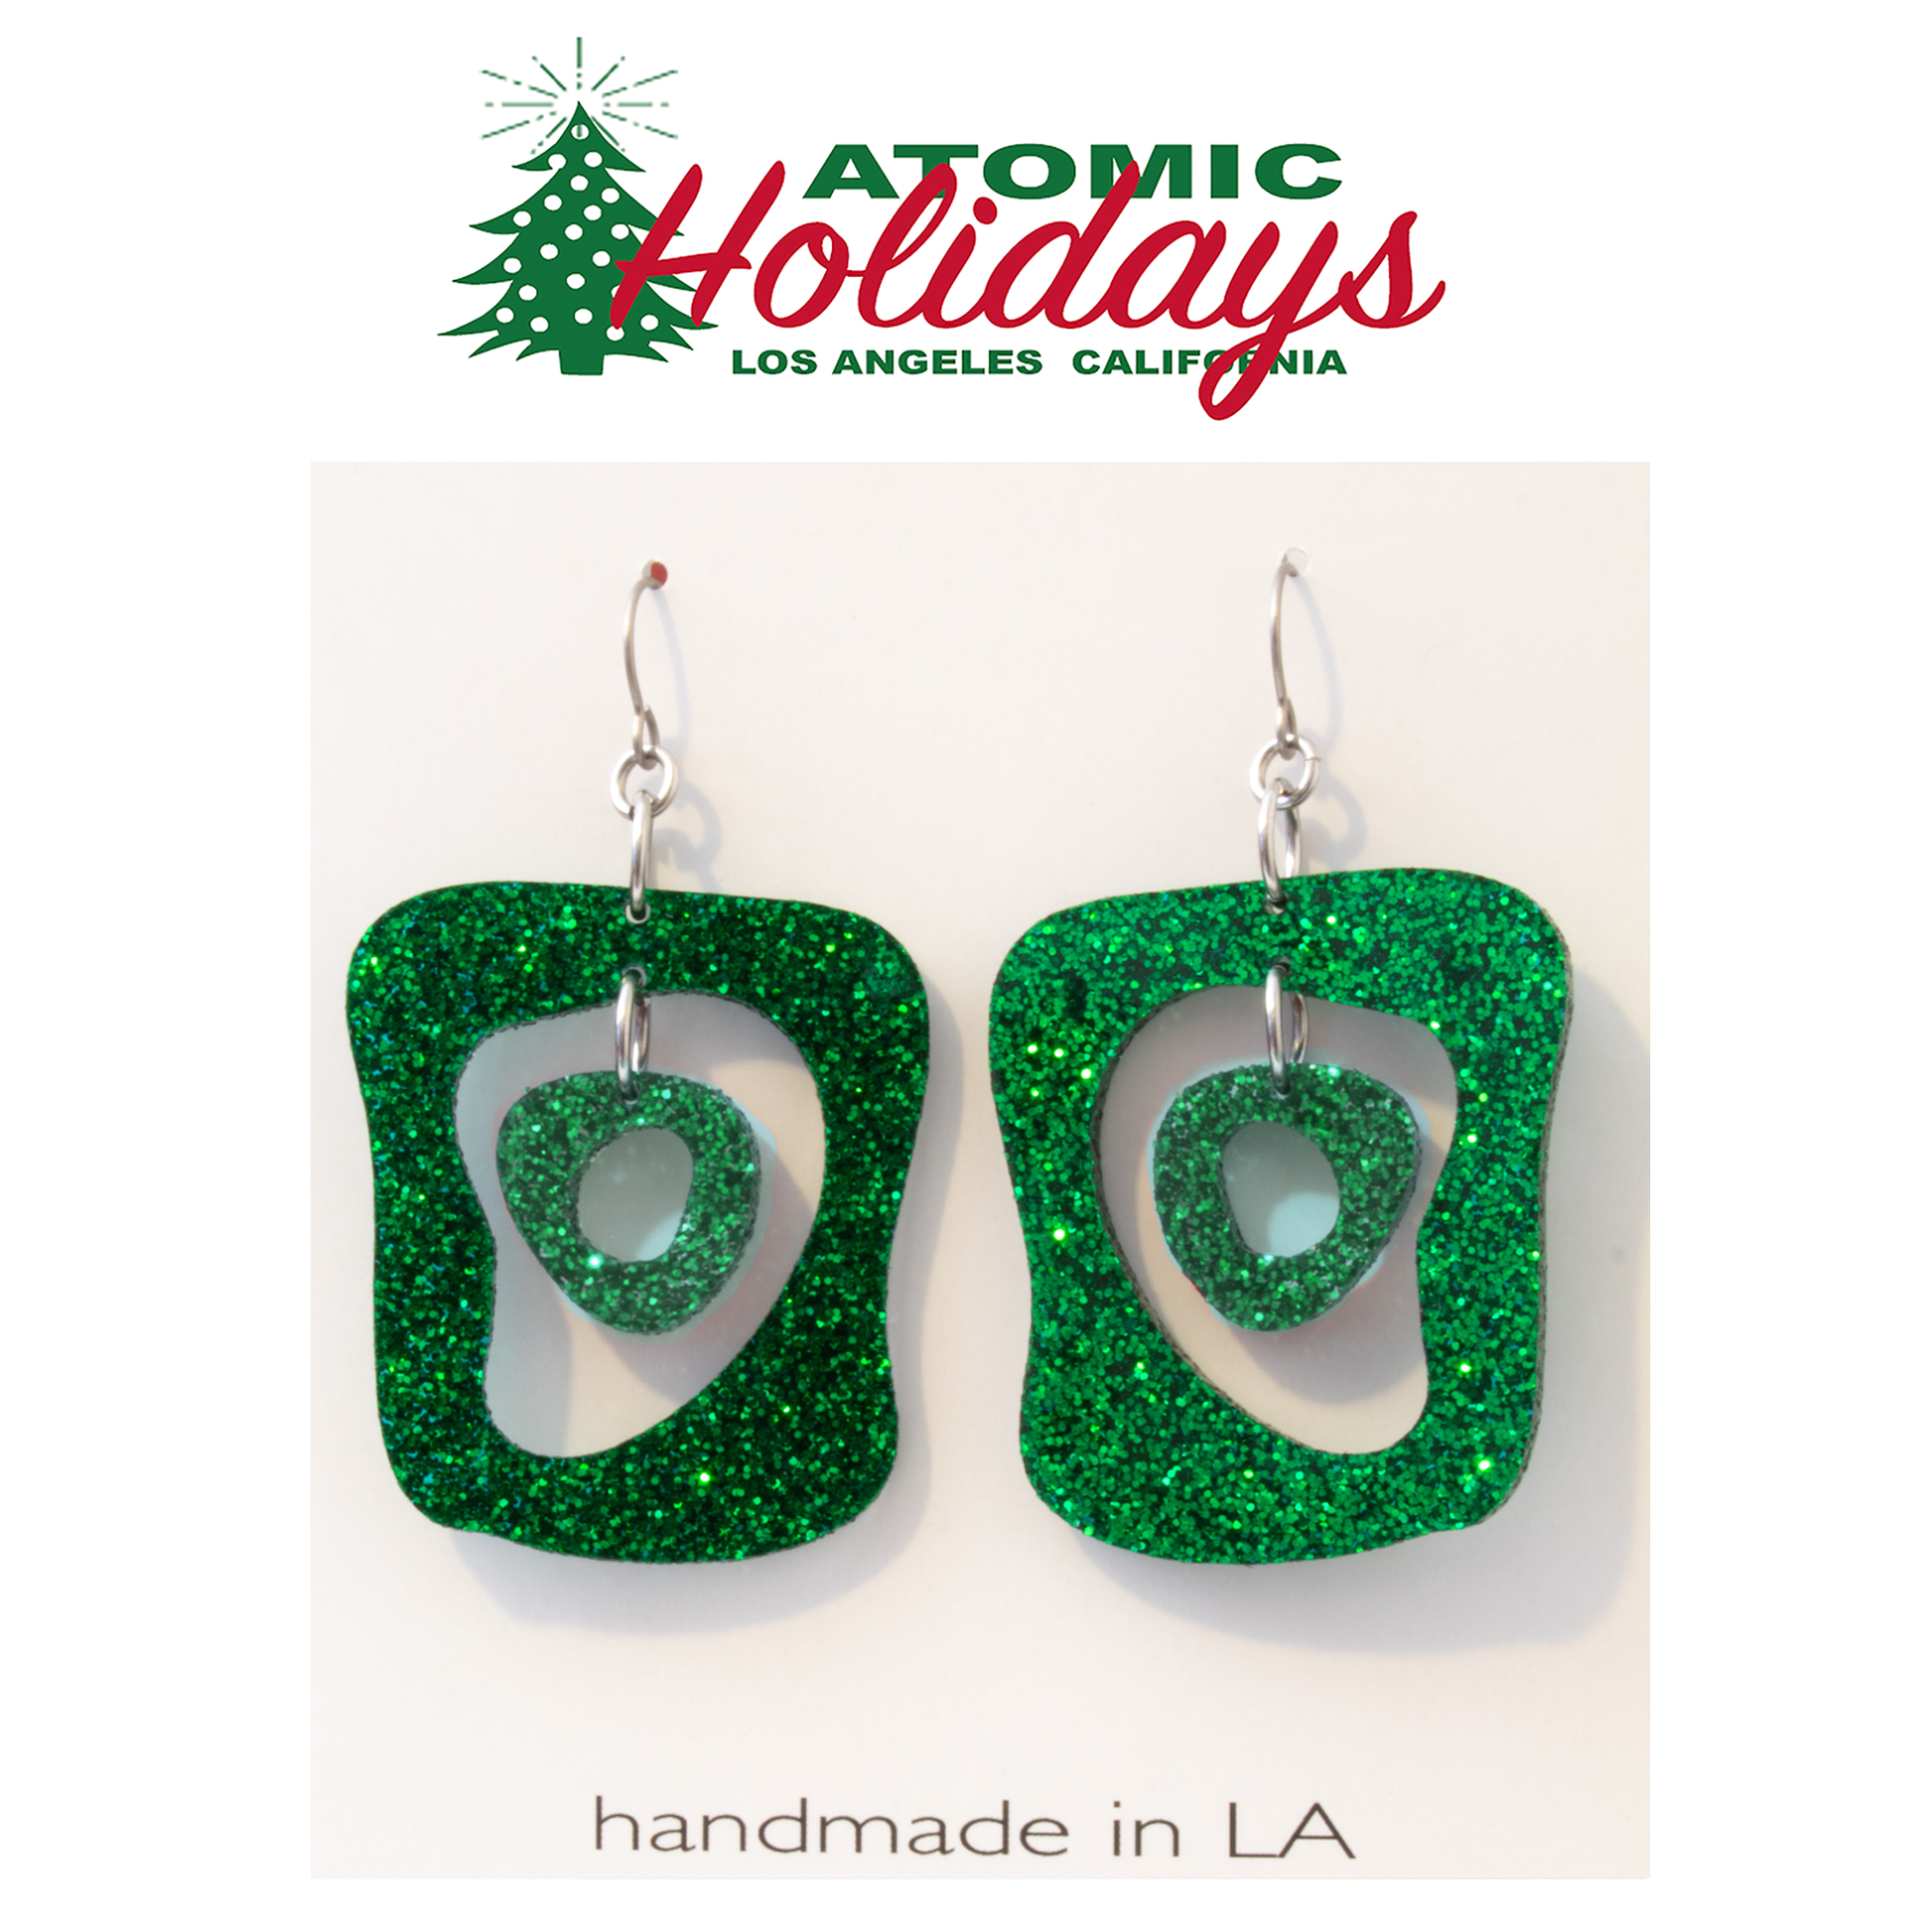 Atomic Holidays Mid Mod Statement Earrings in glitter green made in Los Angeles by AtomicMobiles.com